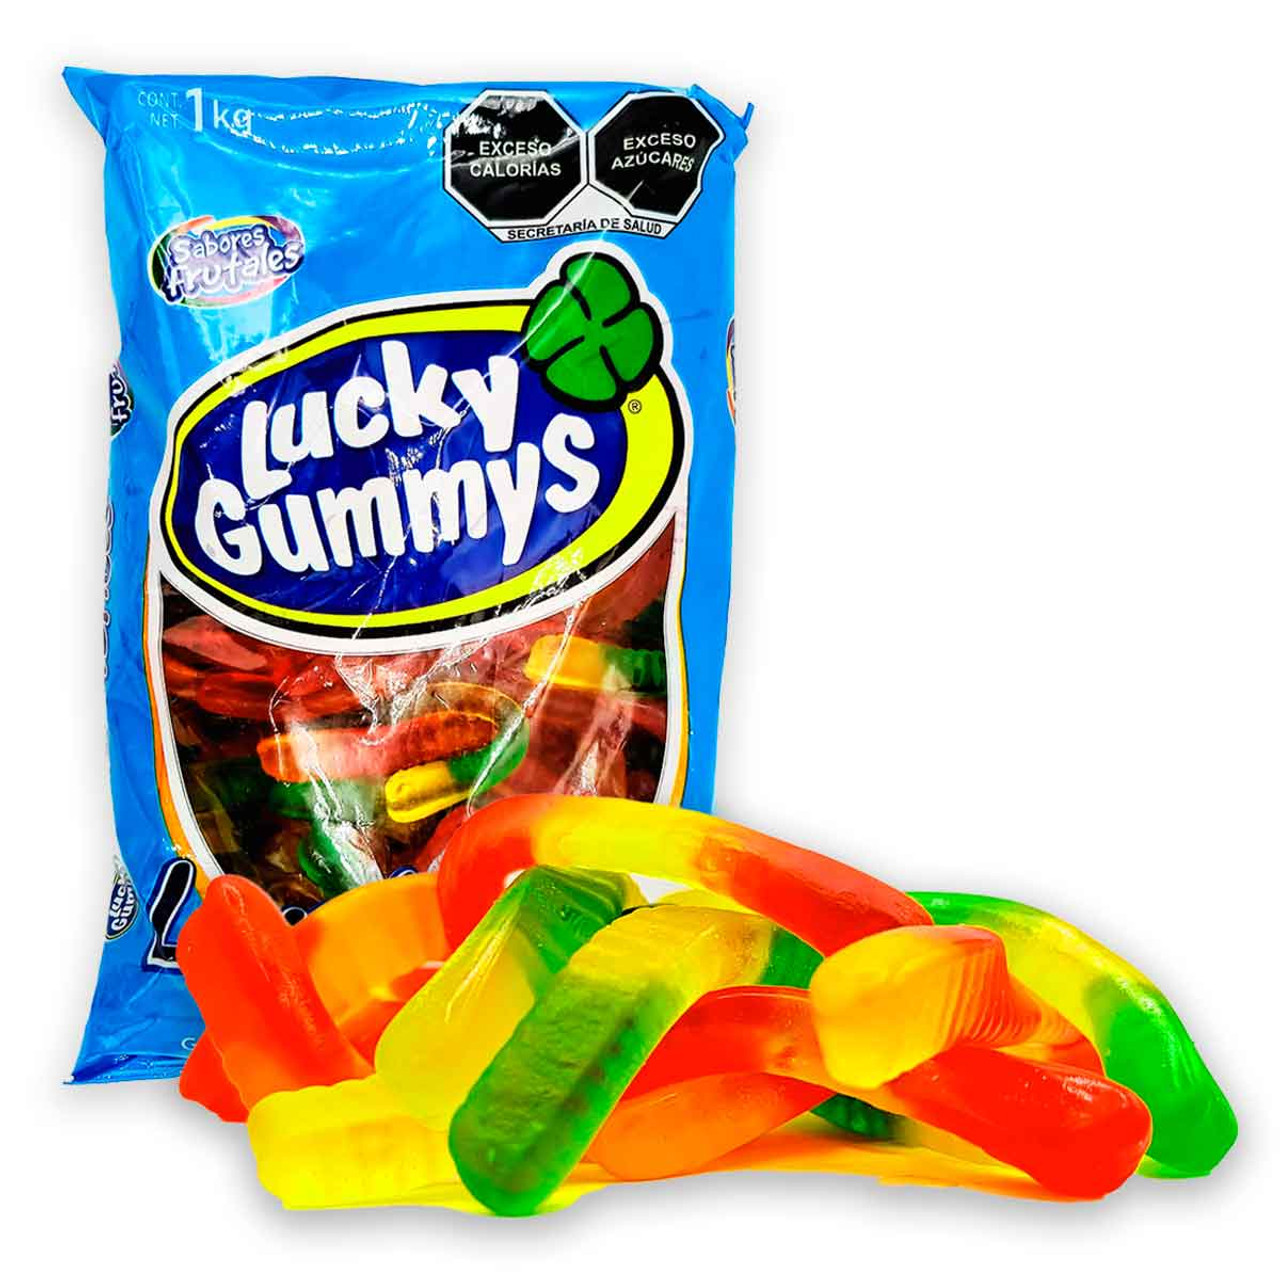 Bag full of delicious and neon colorfull jelly gummies in the shape of little worms.